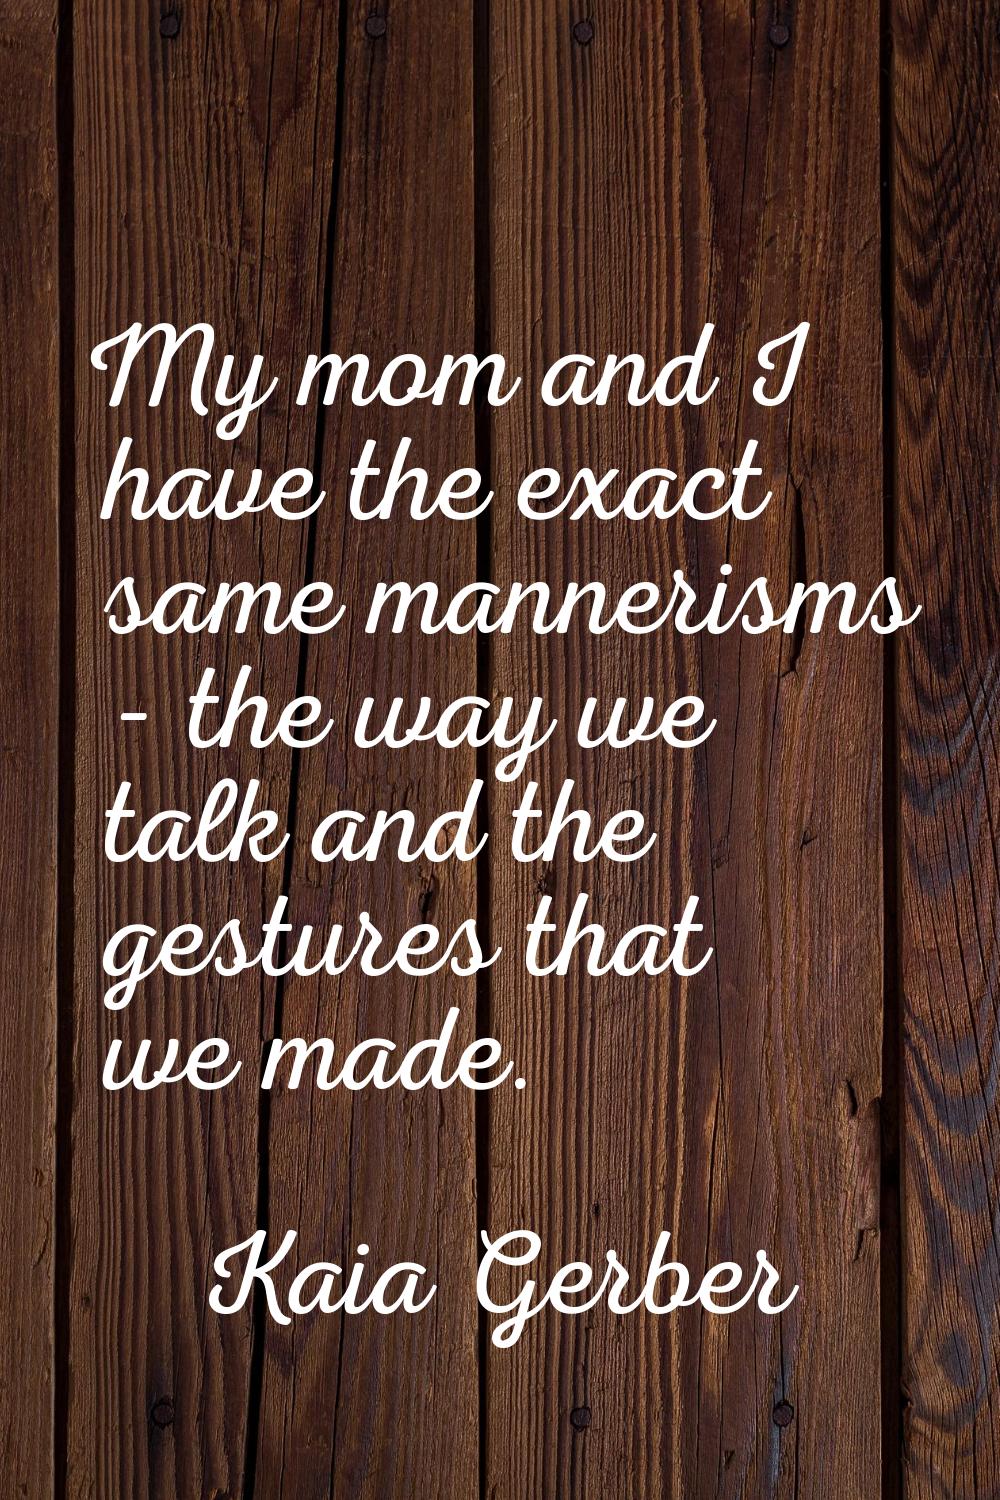 My mom and I have the exact same mannerisms - the way we talk and the gestures that we made.